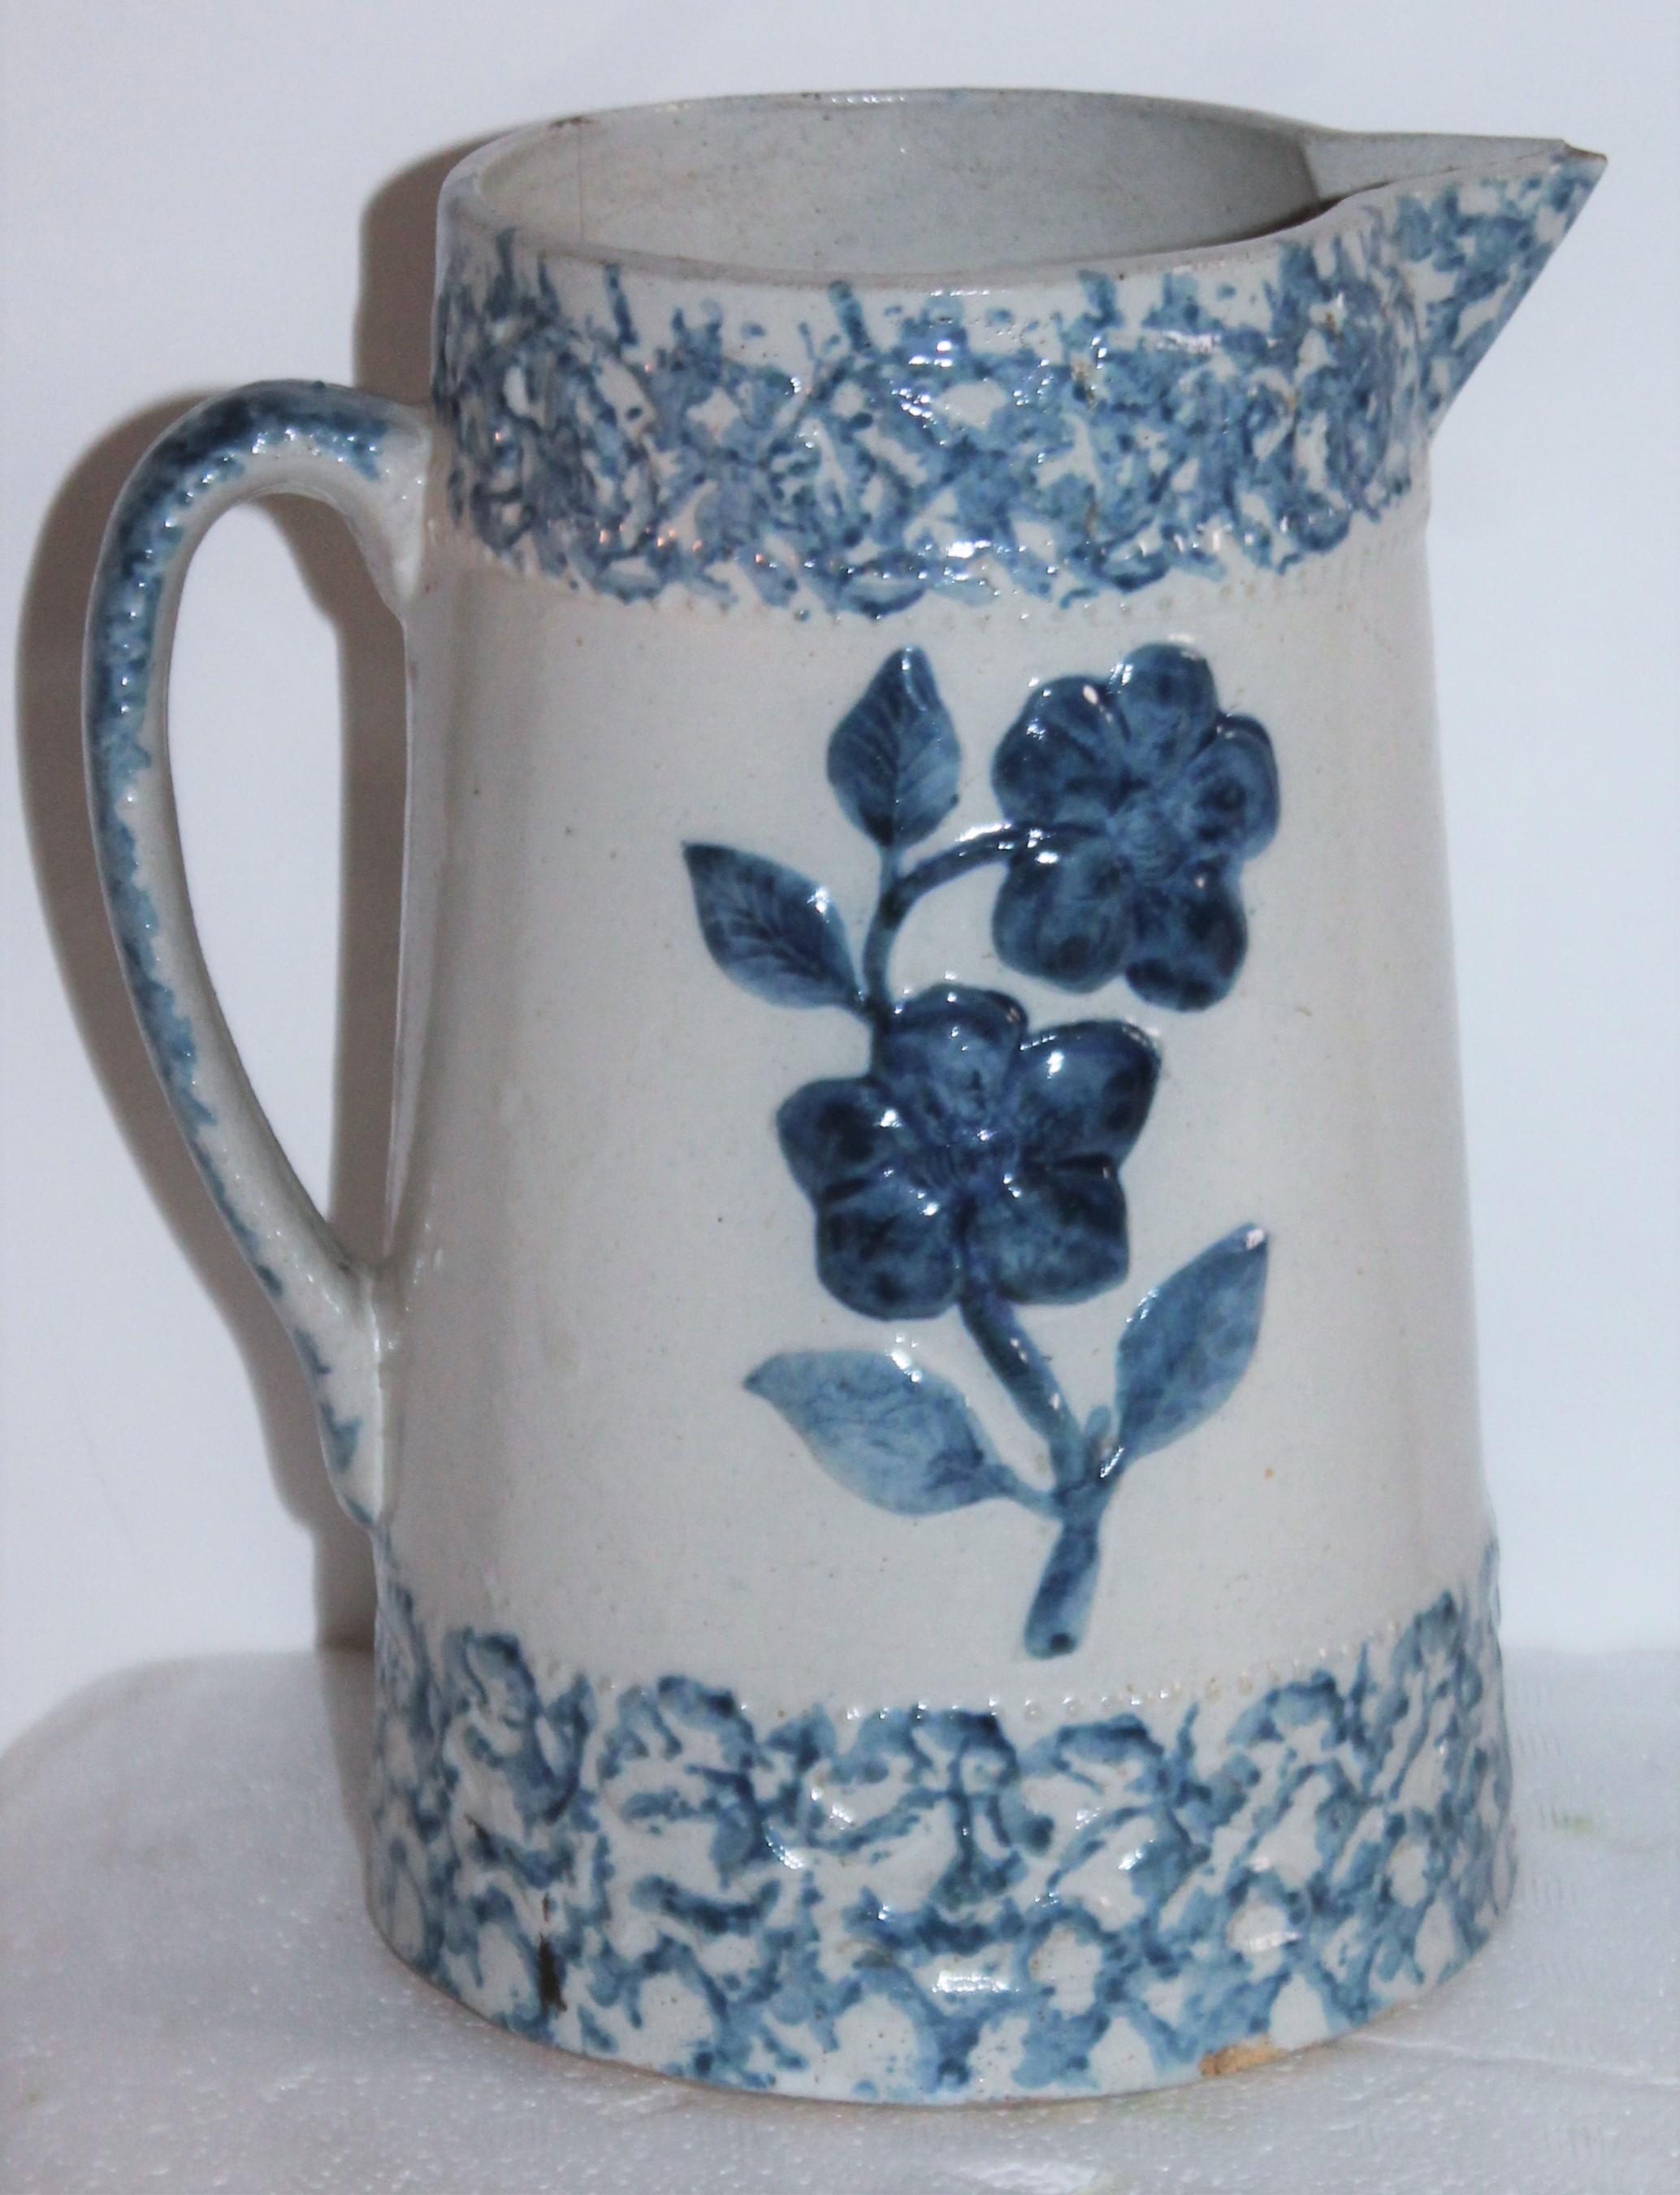 This floral decorated sponge ware pitcher is in good condition. Great for flowers.